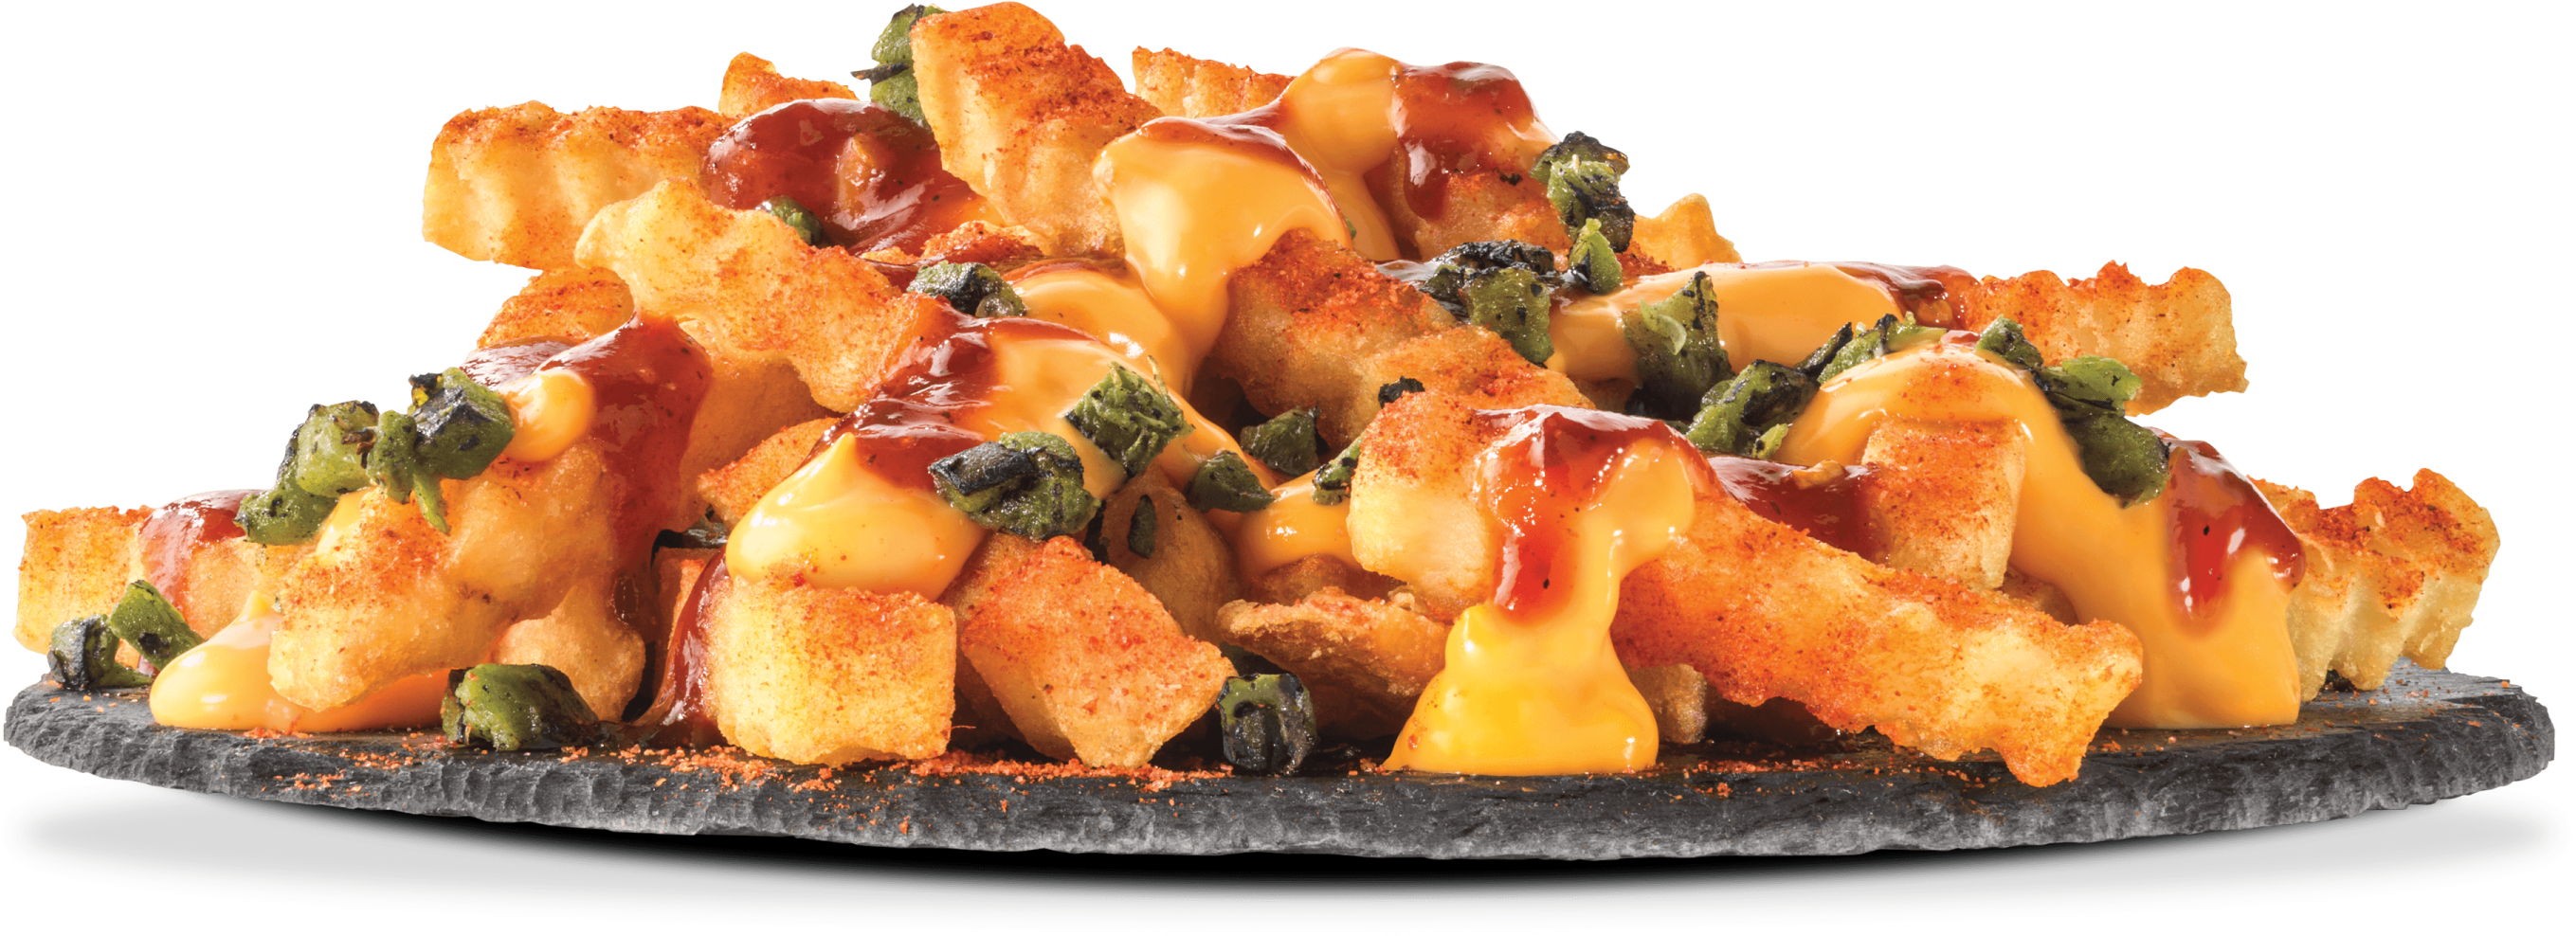 Arby's Diablo Loaded Fries Nutrition Facts